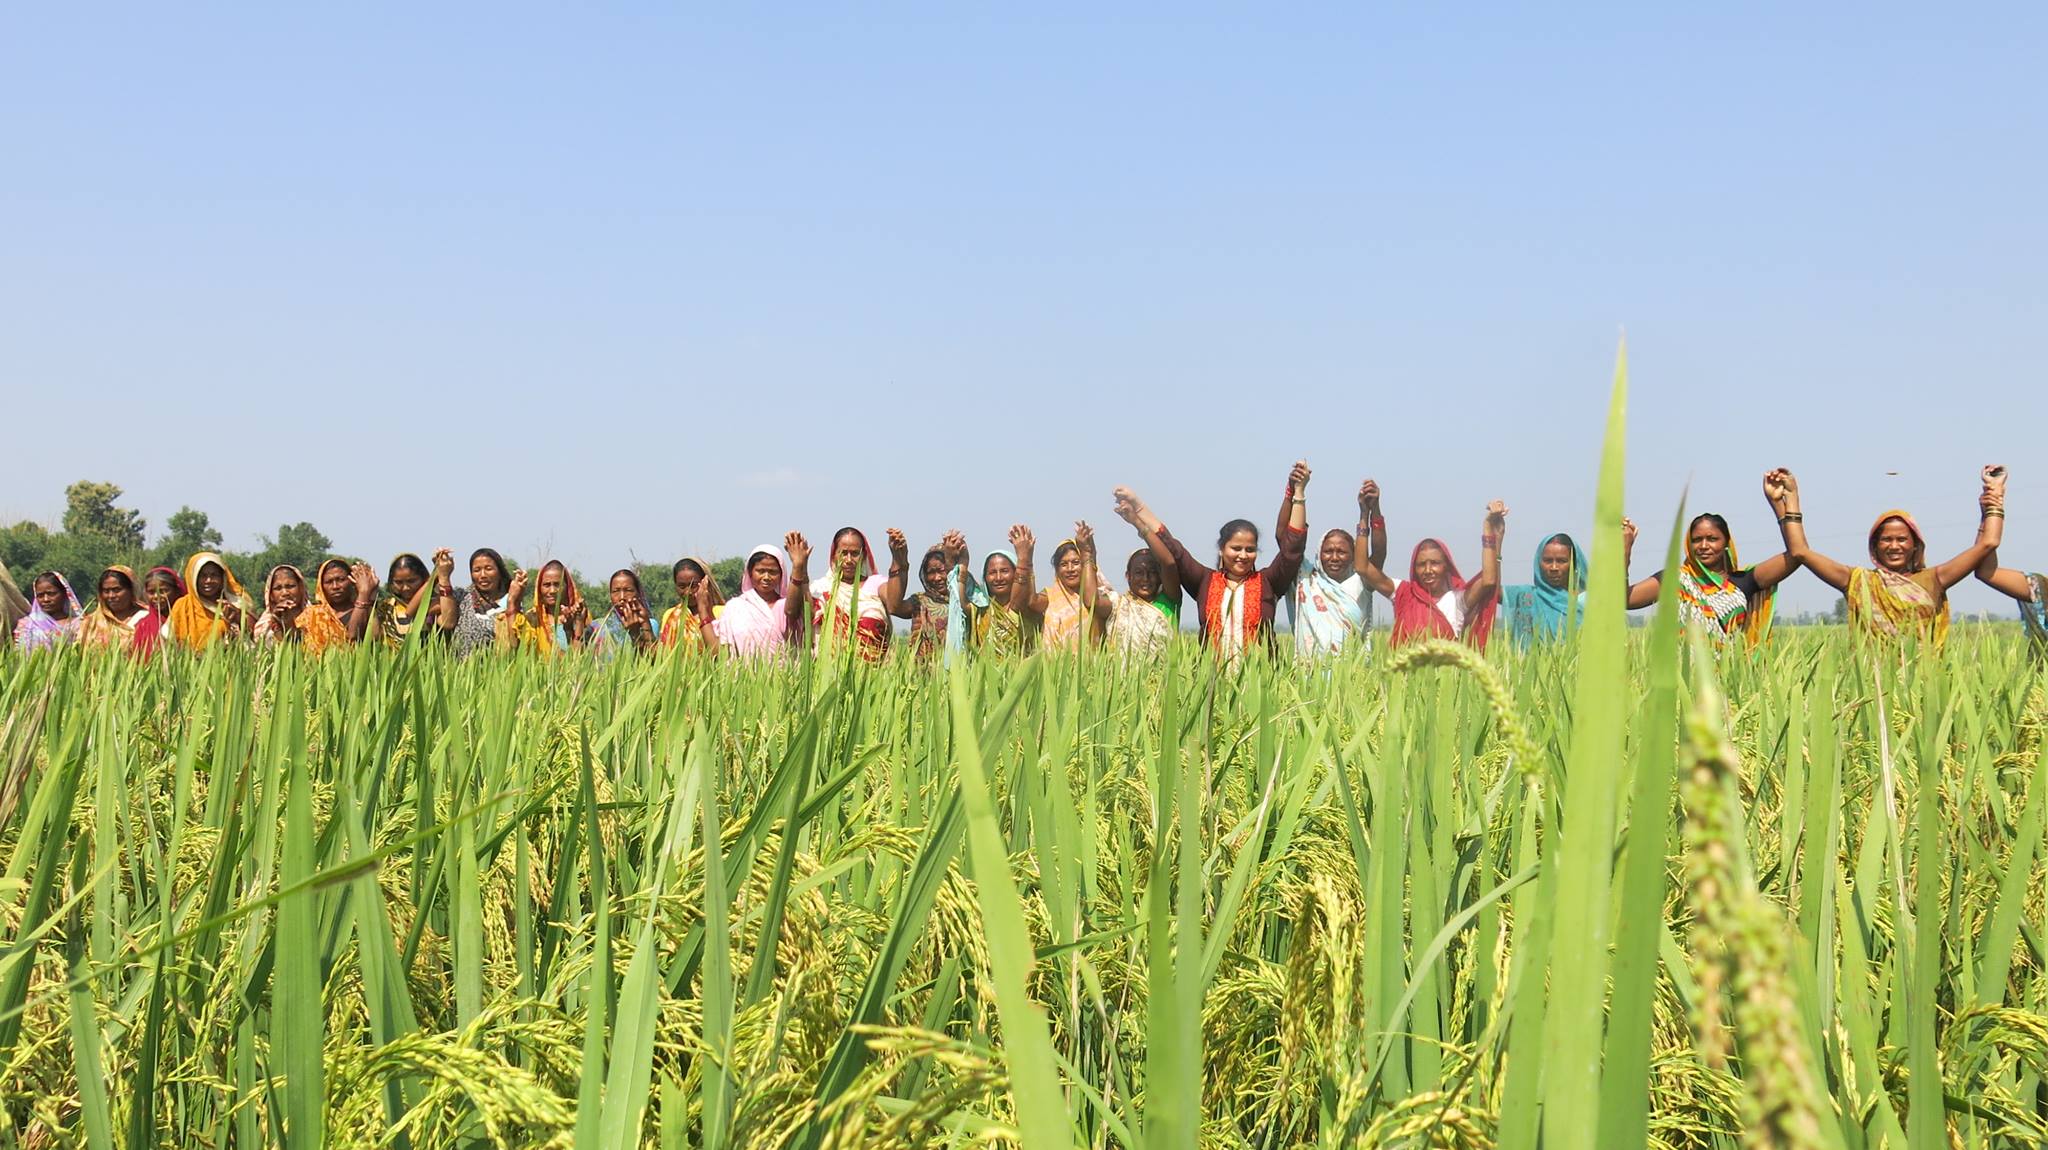 CIMMYT researcher Madhulika Singh (center-right) stands with farmers from self-help groups in the village of Nawtanwa, West Champaran, in India’s Bihar state. CIMMYT works on gender inclusion and participation through partnerships with other organizations and self-help groups. (Photo: CIMMYT)